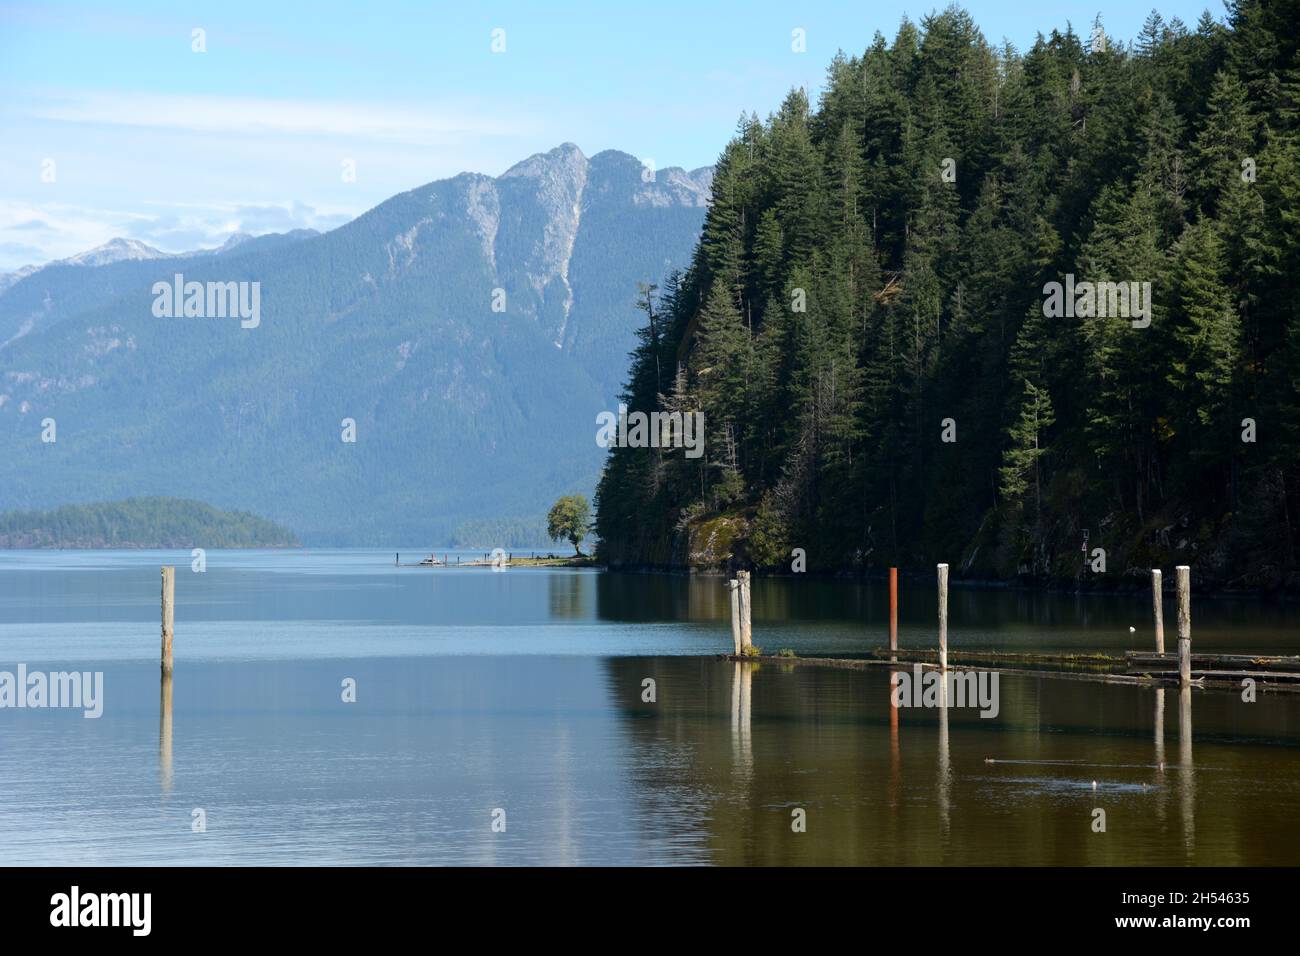 Pitt Lake, one of the world's largest tidal lakes, and the mountains of the Garibaldi Range, near Pitt Meadows, British Columbia, Canada. Stock Photo